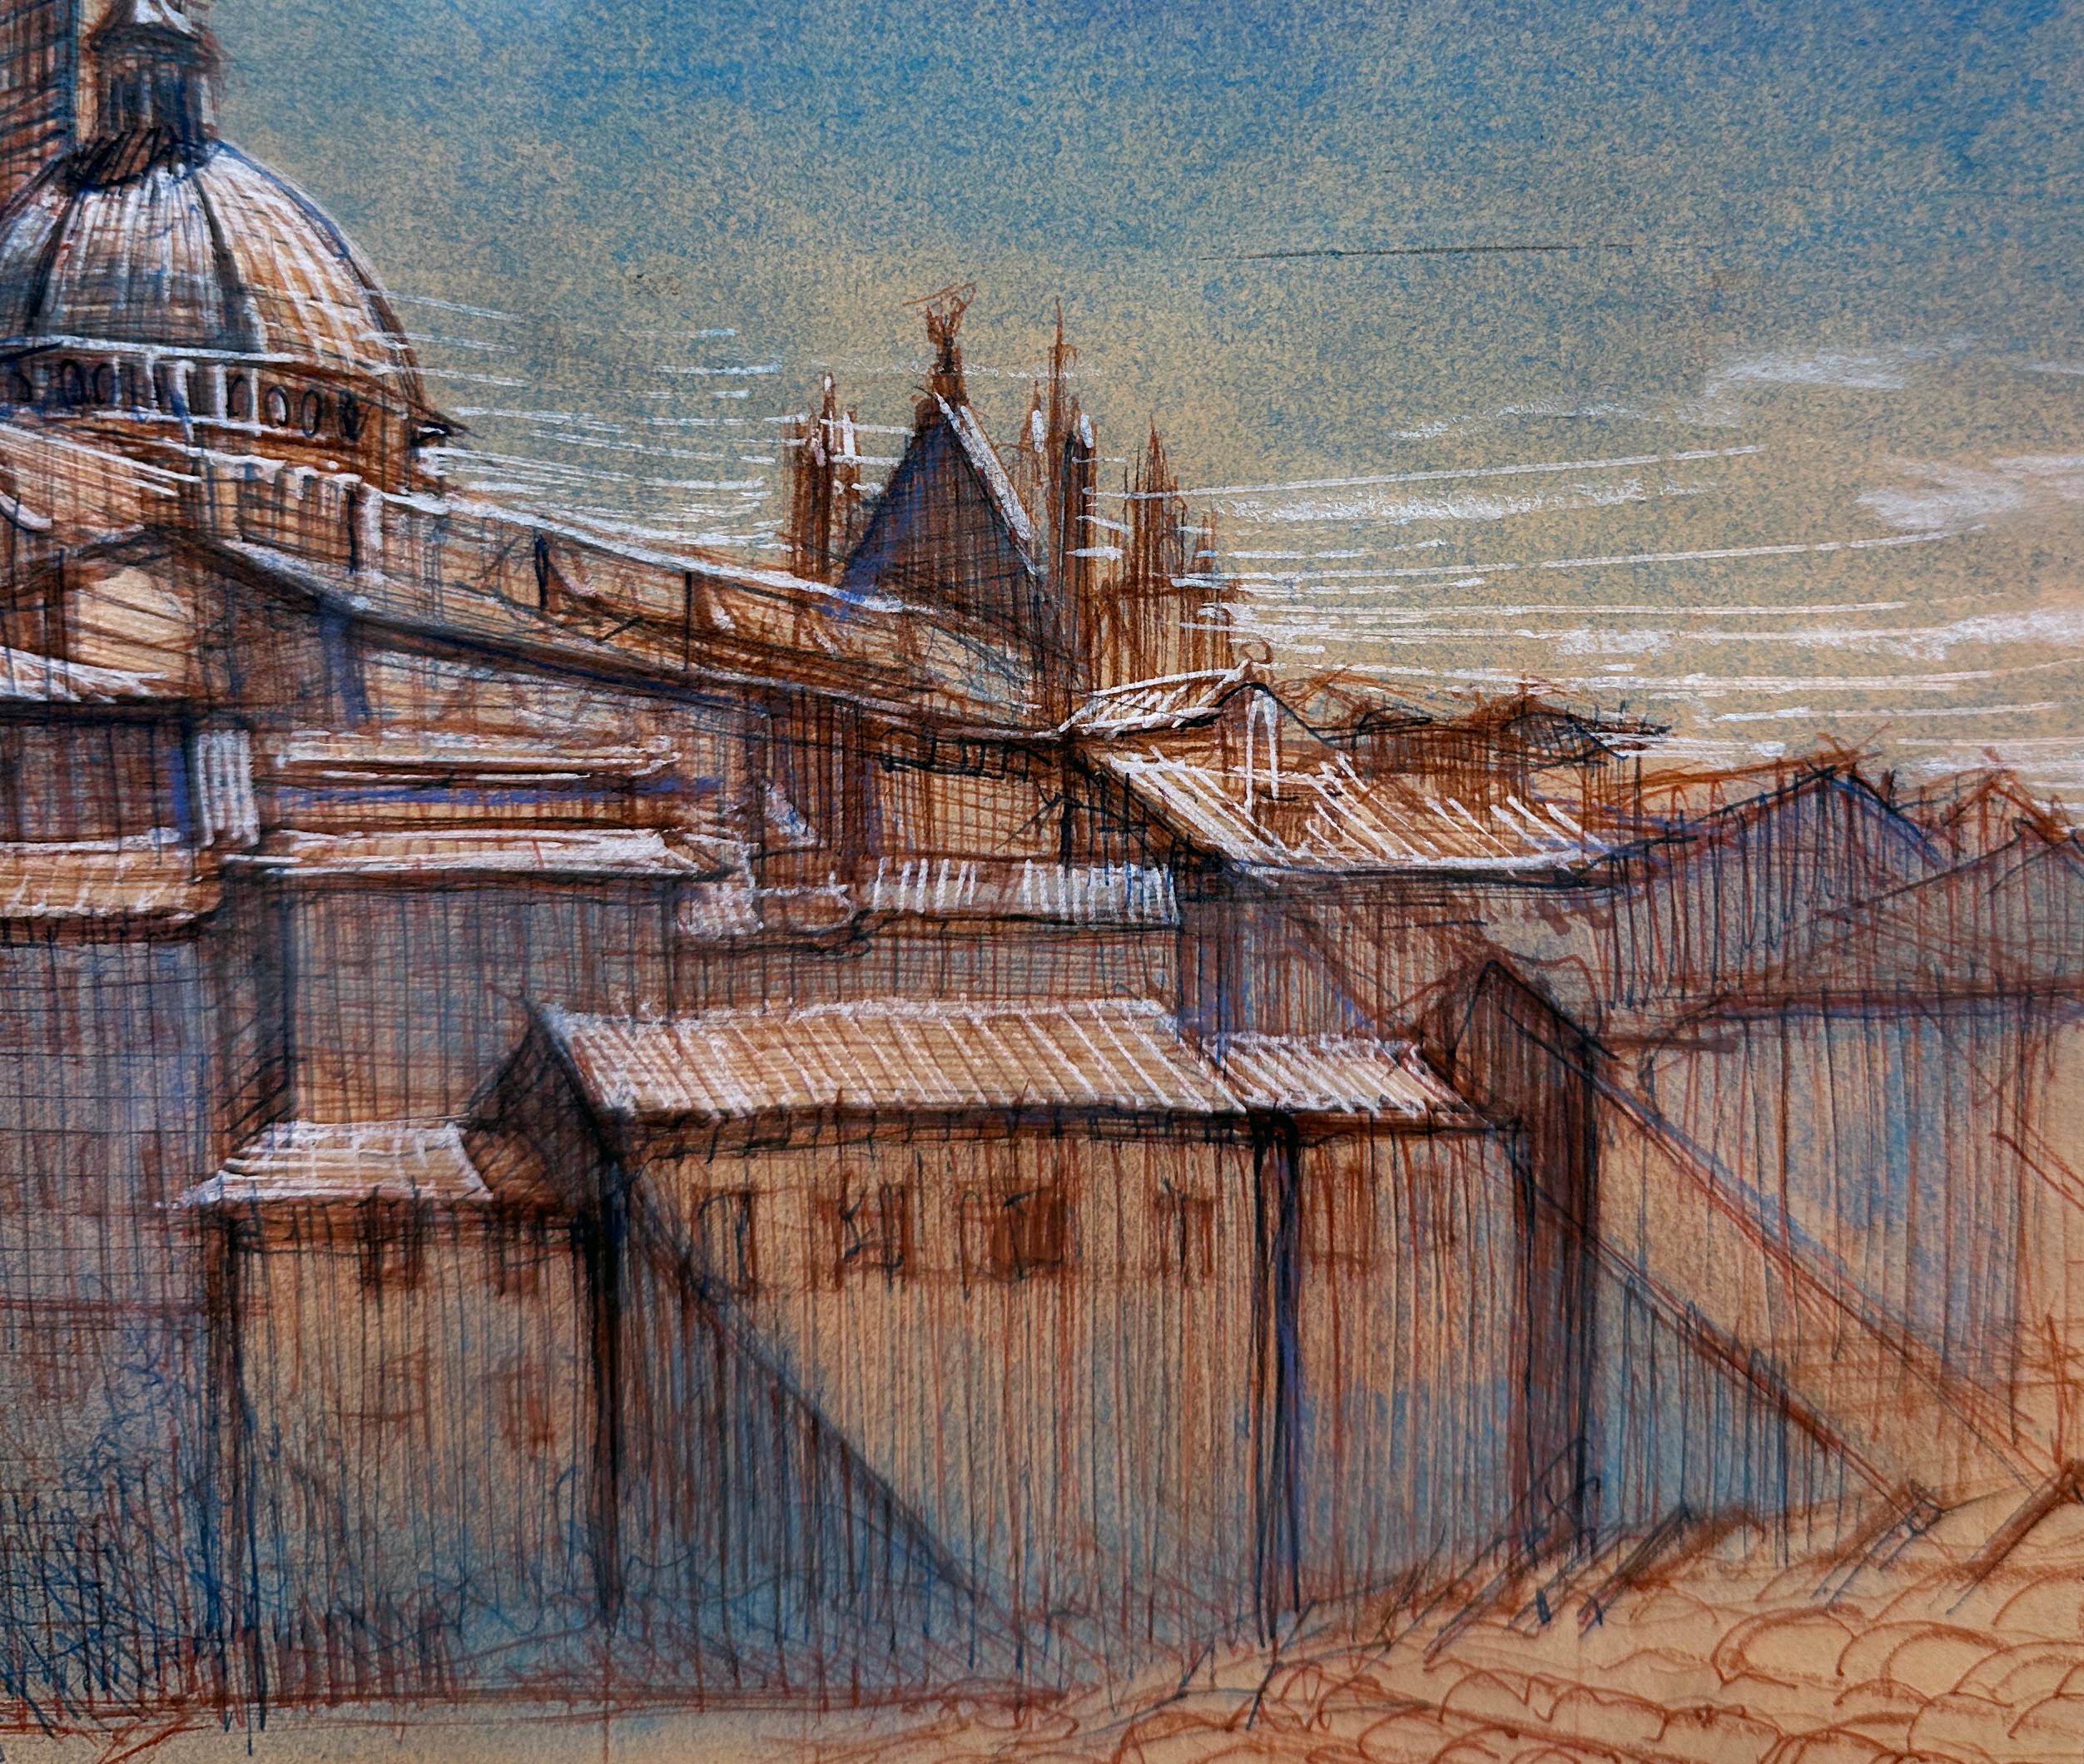 The loose hash marks come together in this colored pen and conte crayon drawing of the Tuscan countryside with a view into Siena with its fabulous Duomo.  This piece is matted with a buttery hued mat and framed in a simple oak colored wooden frame